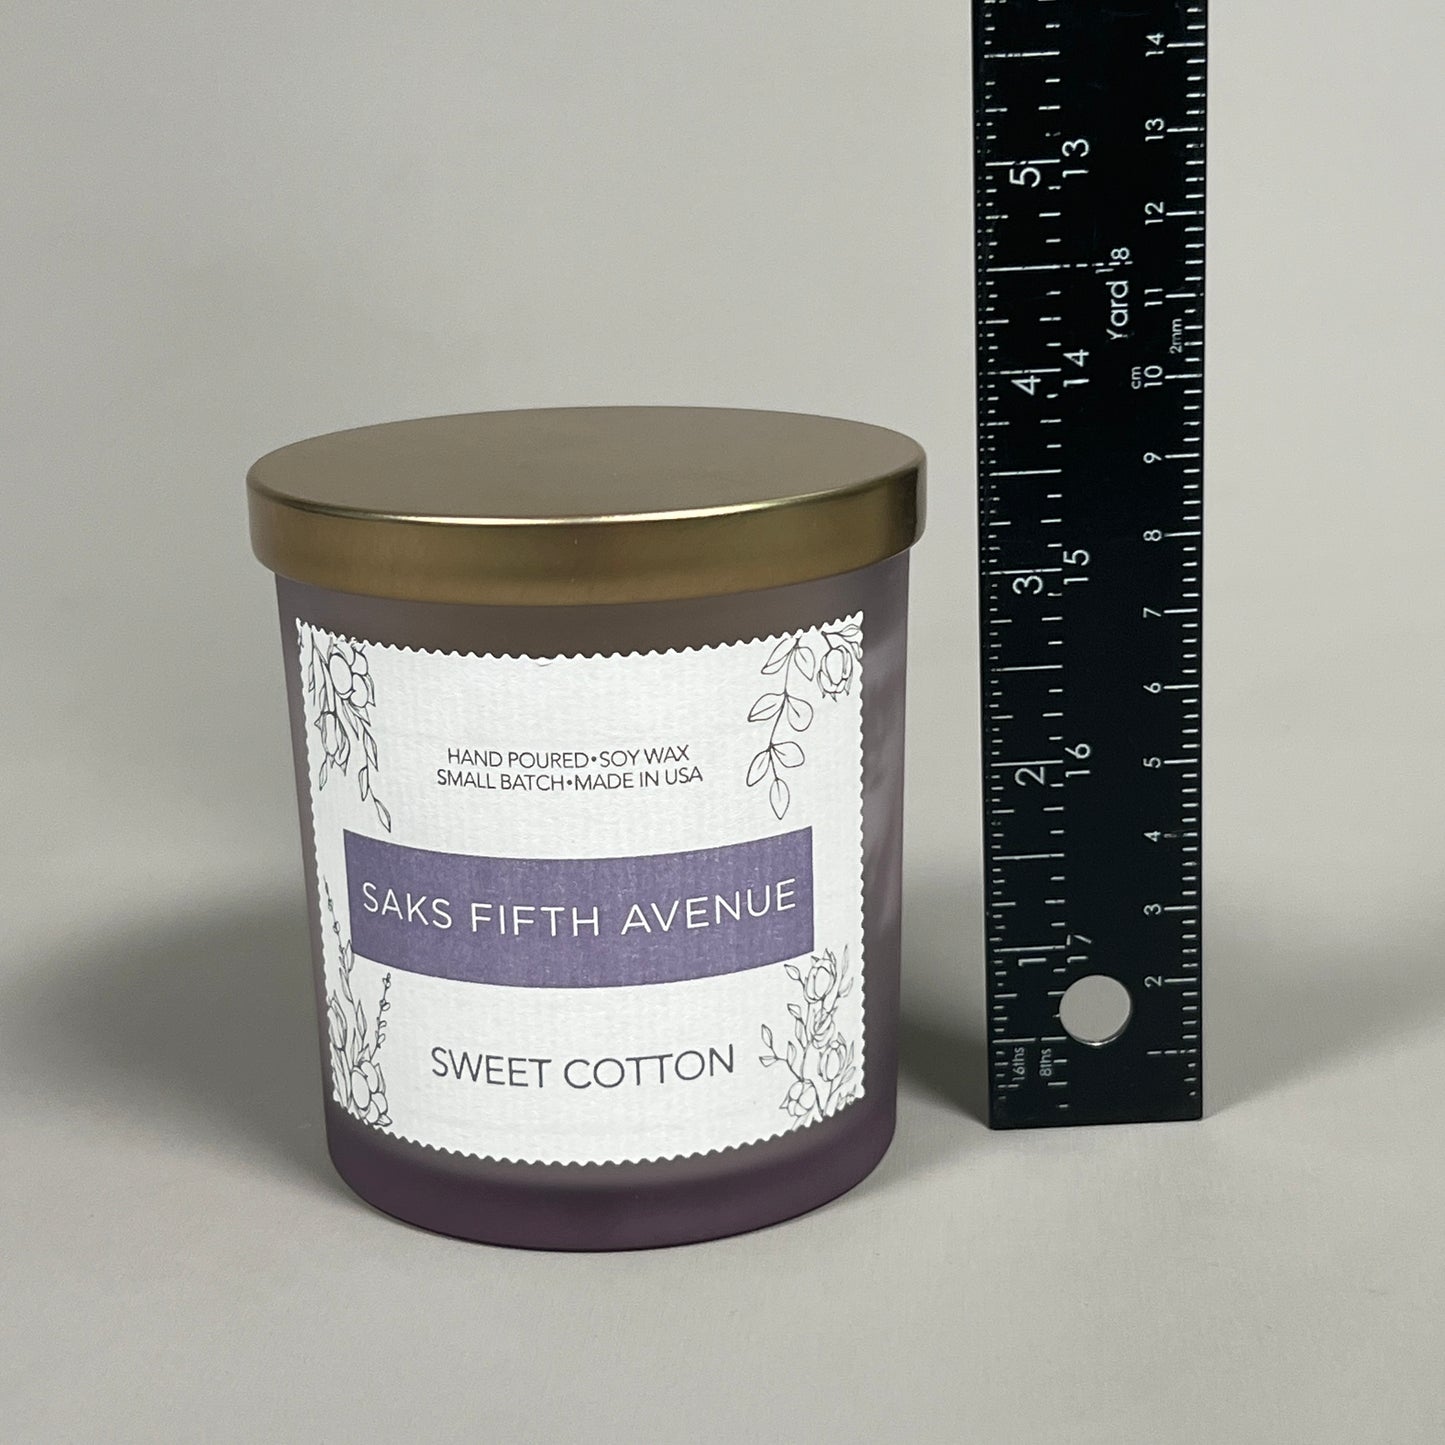 SAKS FIFTH AVENUE Sweet Cotton Hand Poured Soy Wax Candle 8 fl oz (New)